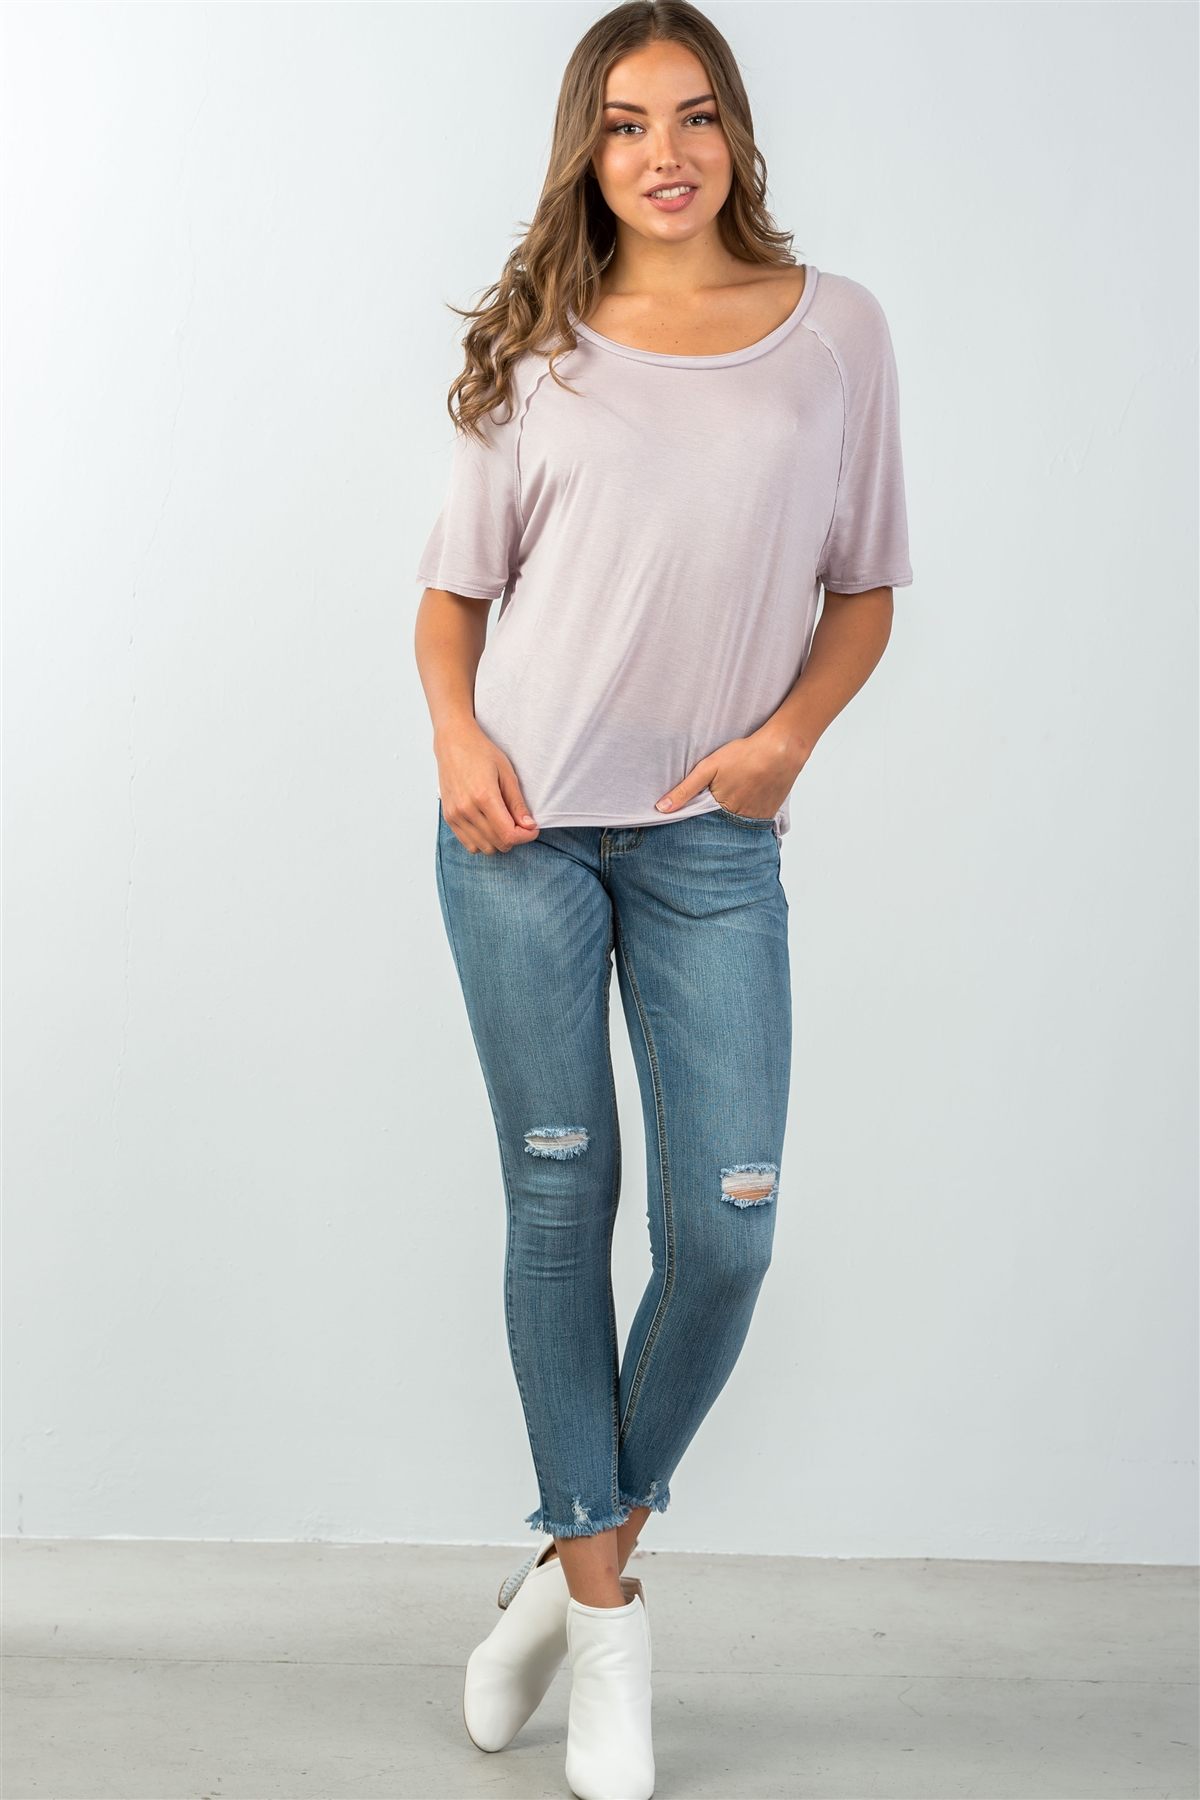 Ladies fashion scoop neckline semi sheer relaxed classic tee